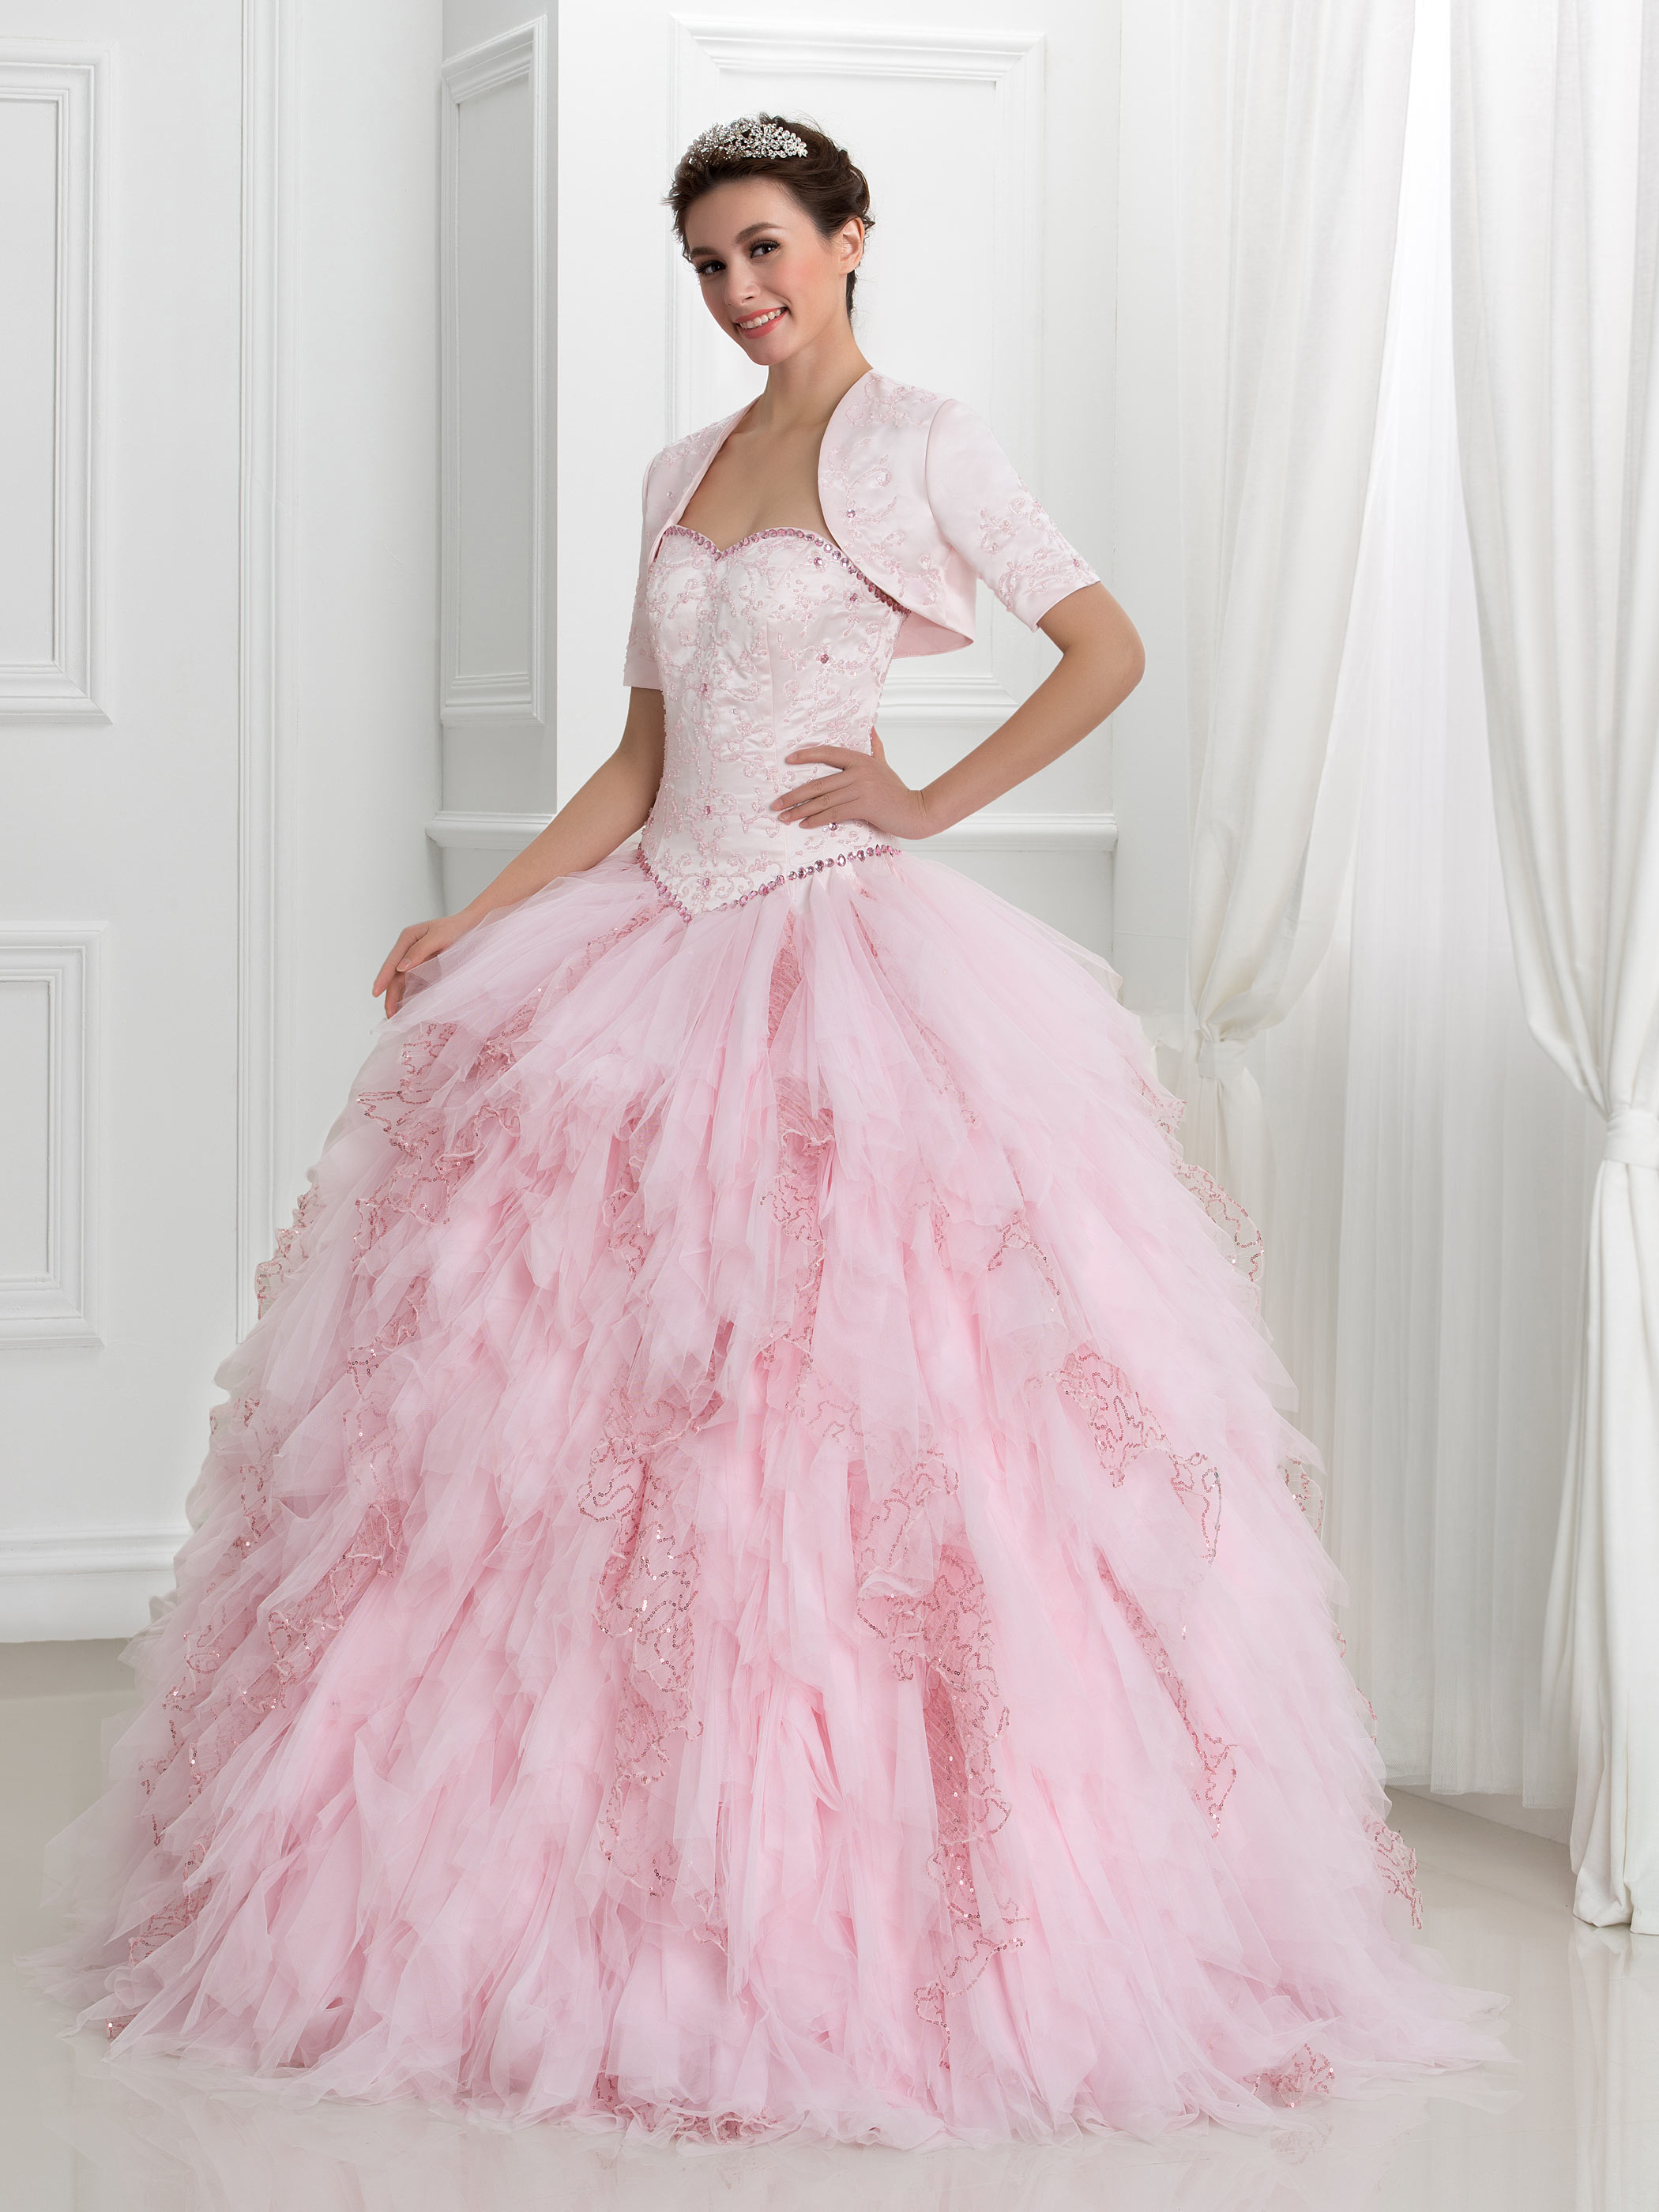 Ericdress Beading Sequins Tiered Ball Gown Quinceanera Dress With Jacket/Shawl